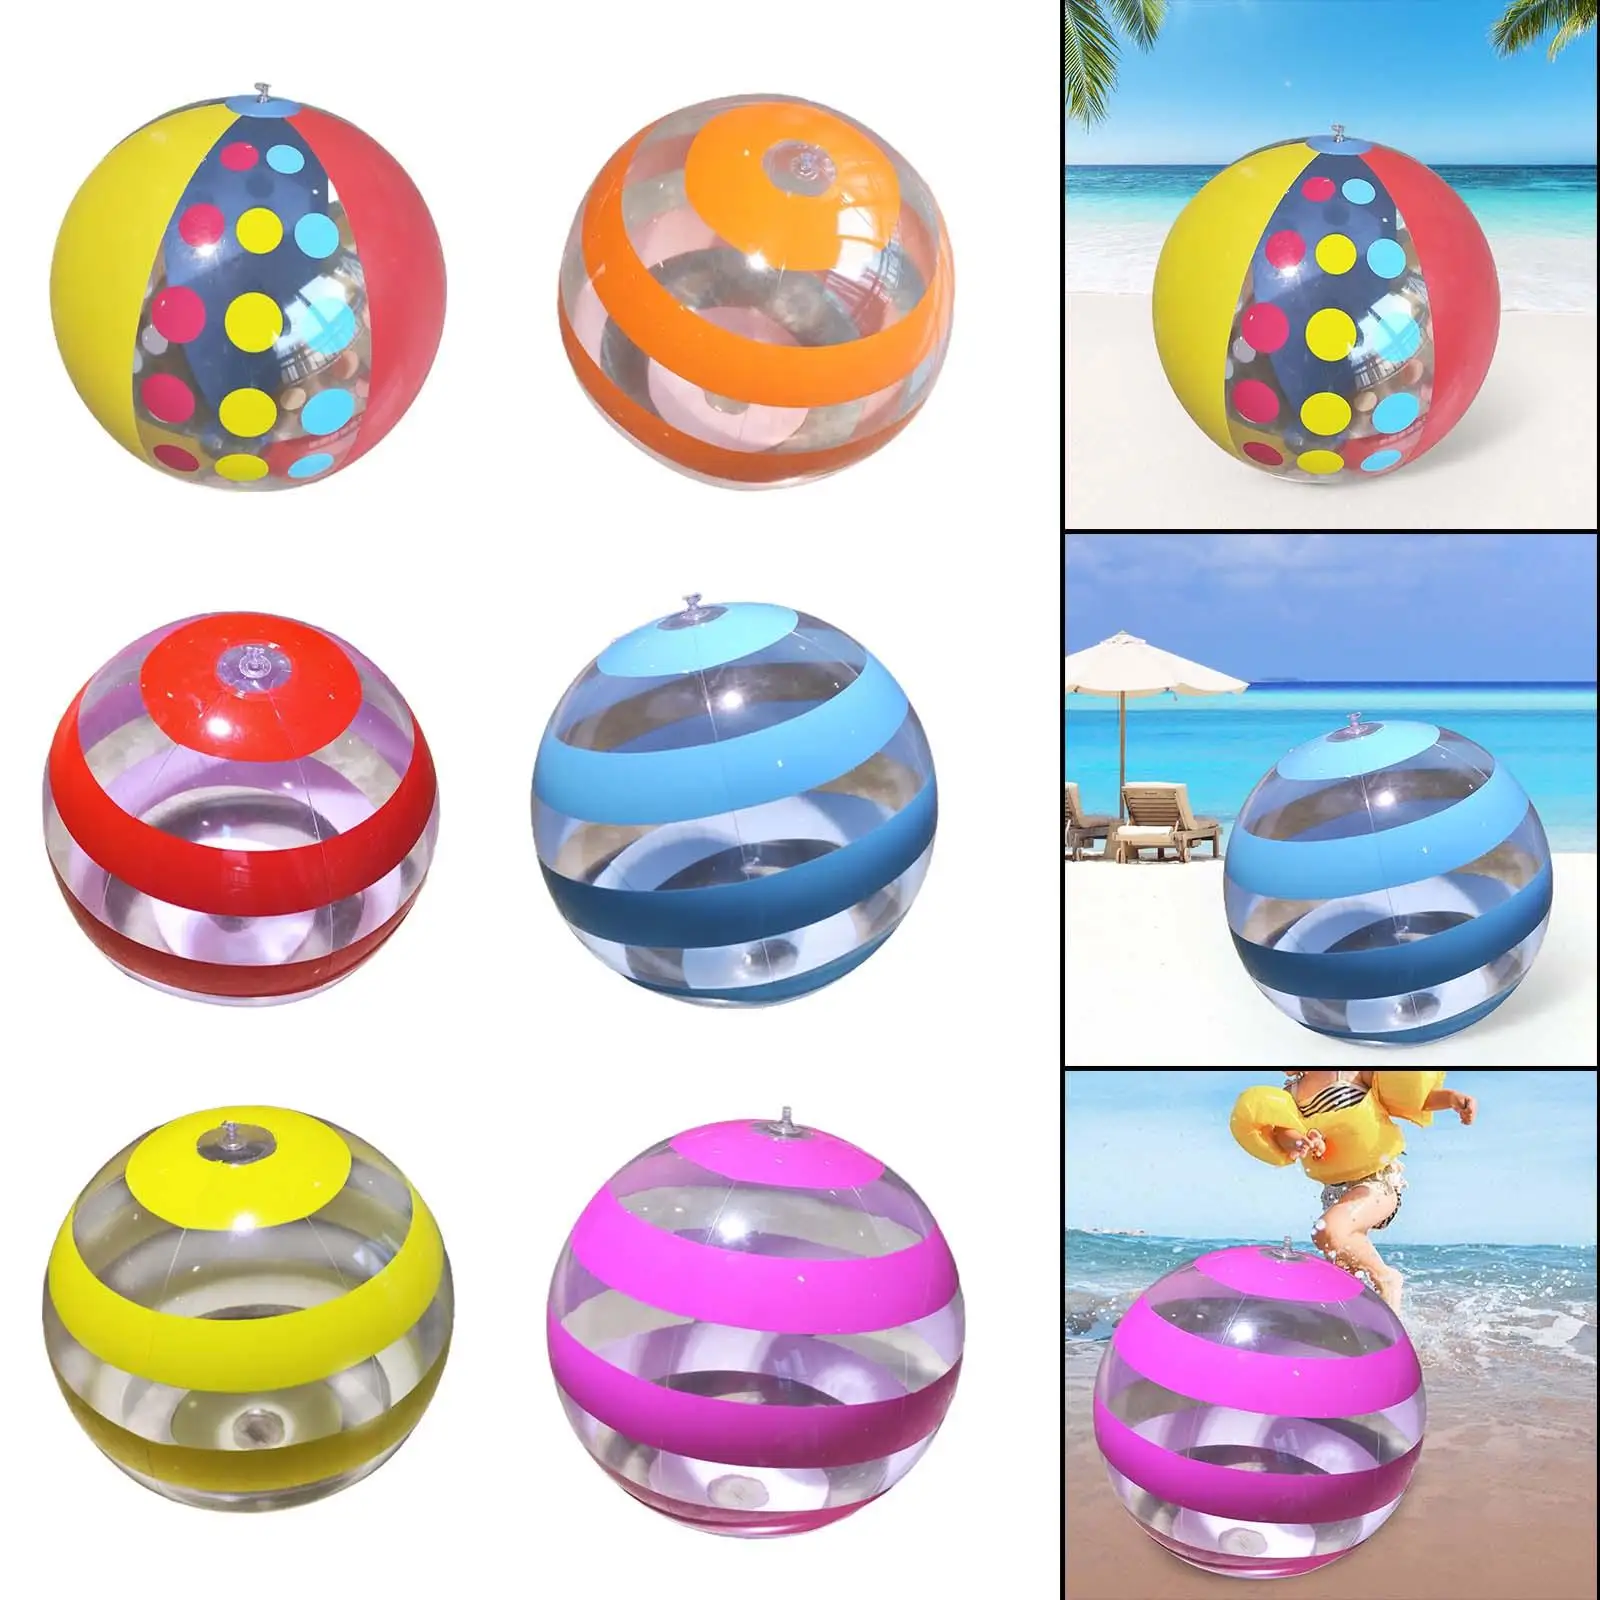 Swimming Pool Balls 15.75`` Party Favor Pool Water Games Toys Summer Water Games for Summer Yard Pool Hawaiian Theme Beach